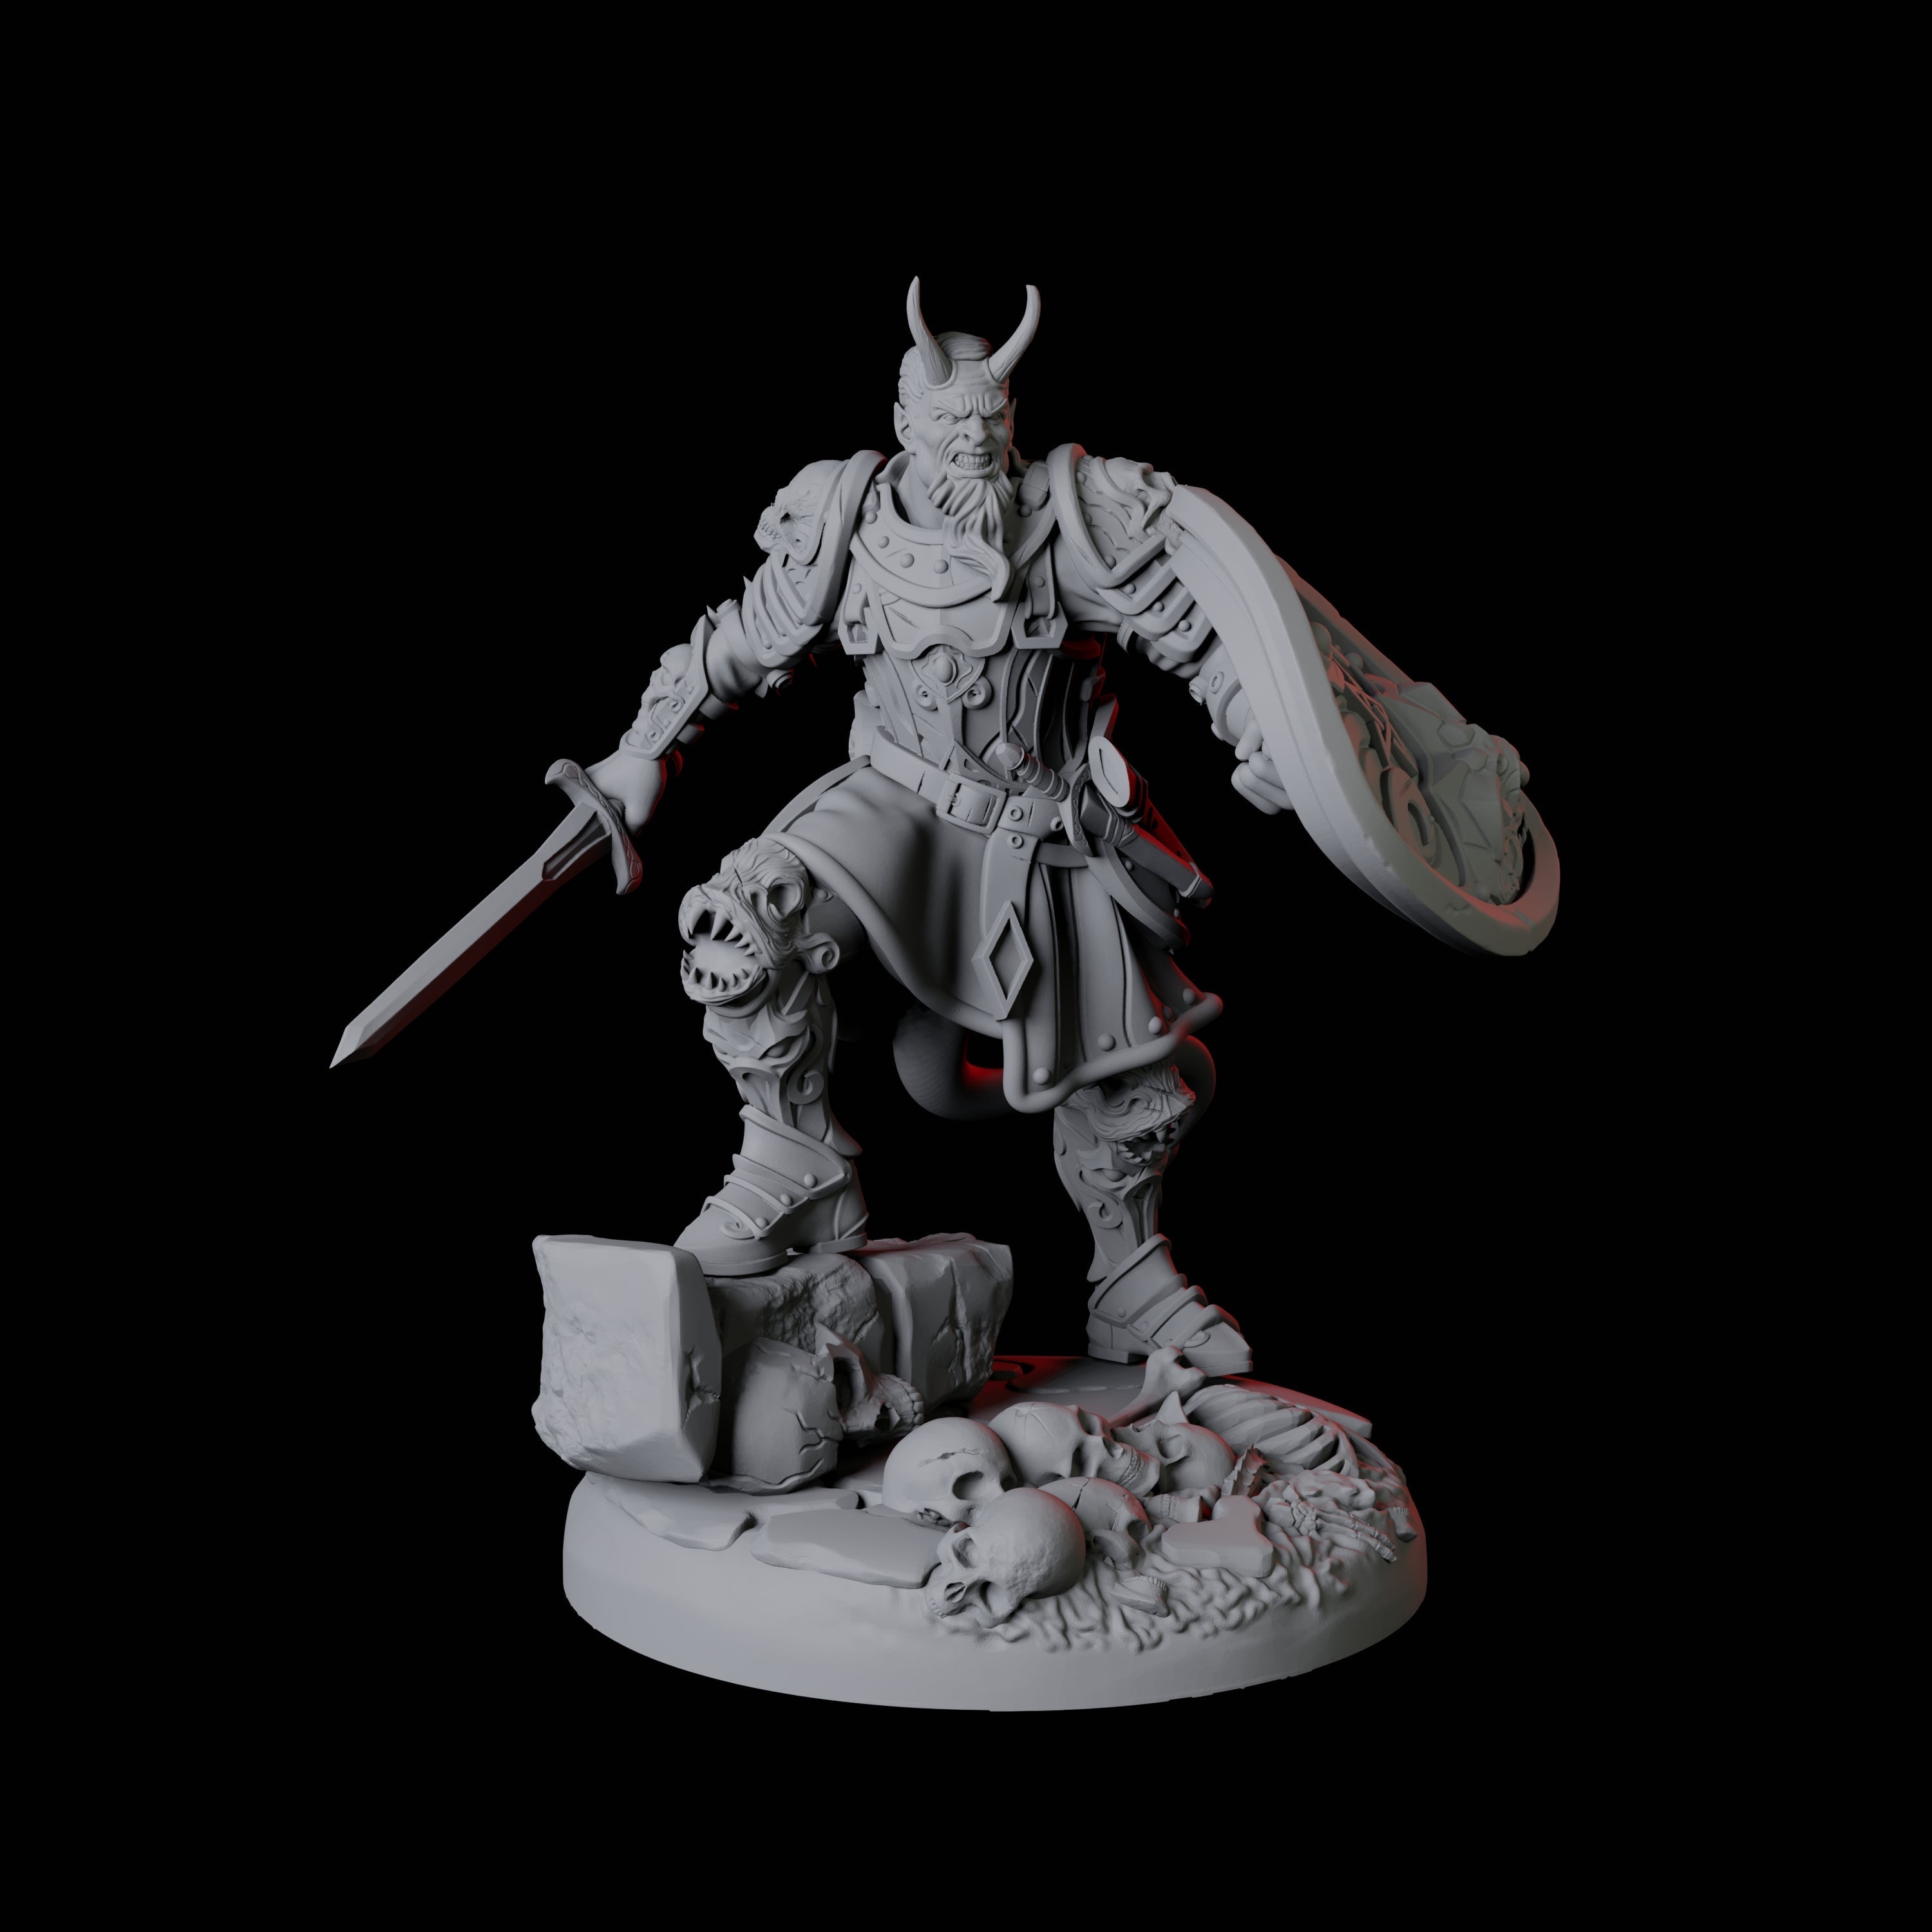 Threatening Bearded Devil A Miniature for Dungeons and Dragons, Pathfinder or other TTRPGs